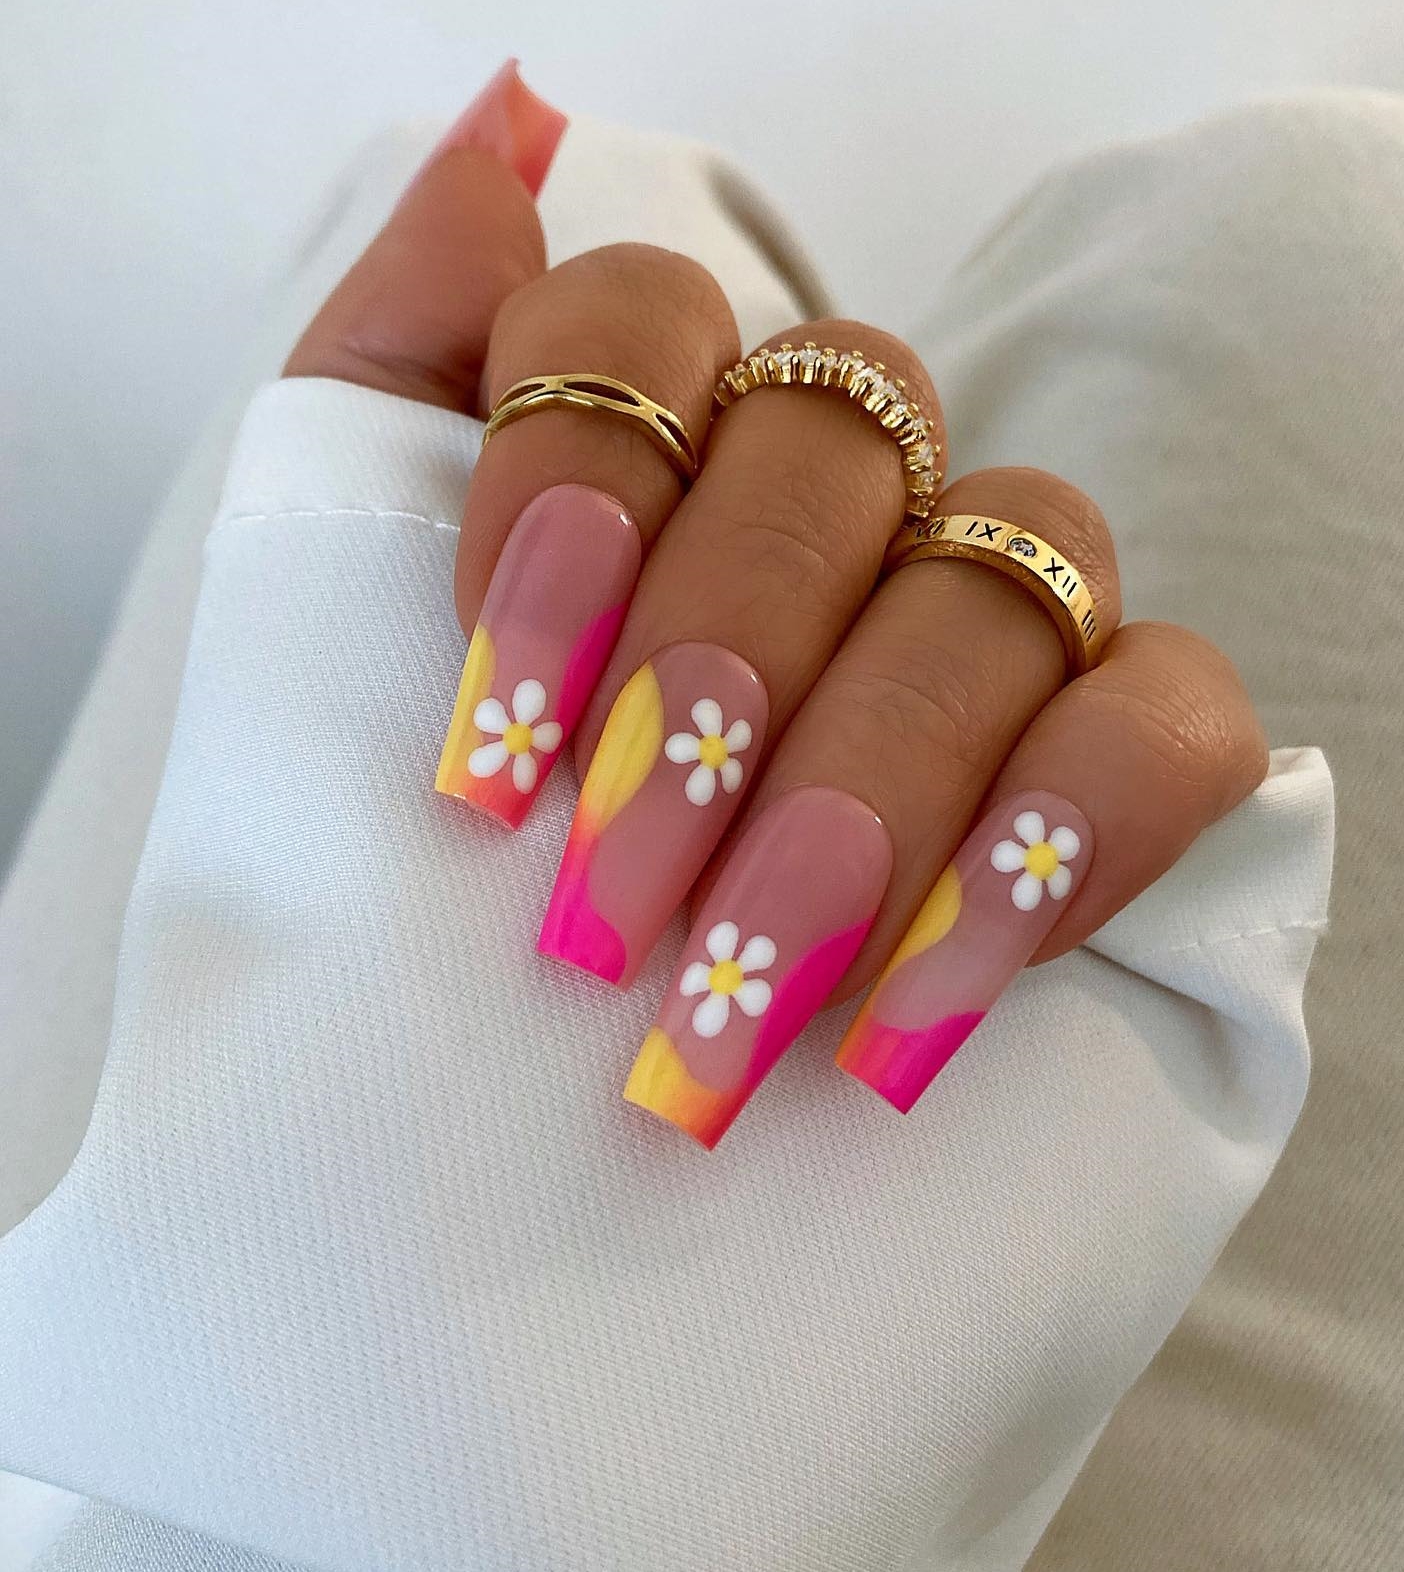 Bright Summer Nails with Flower Design